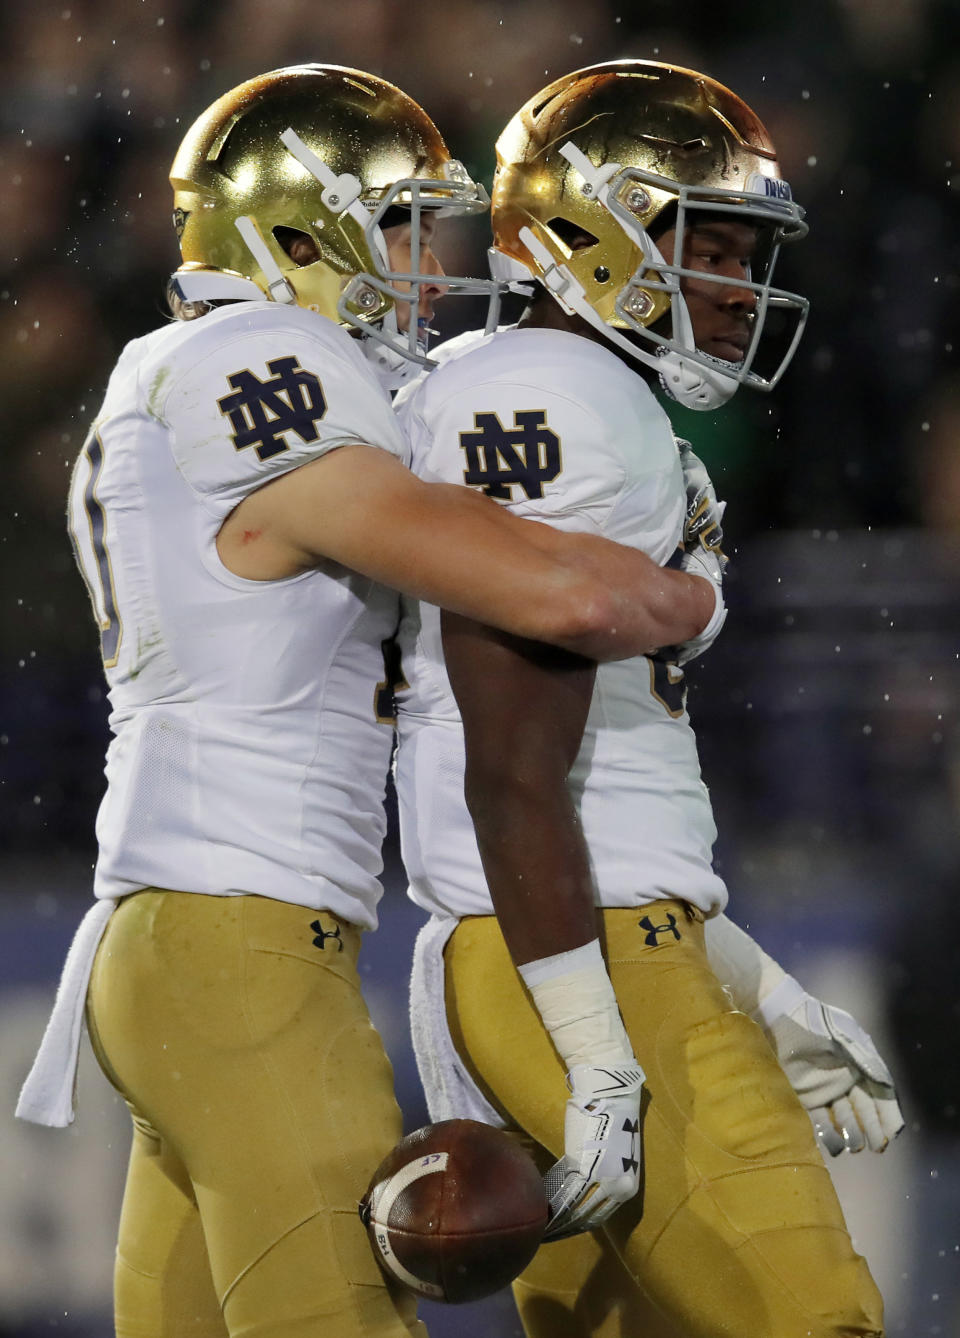 Notre Dame's Michael Young, right, celebrates his touchdown against Northwestern with Notre Dame's Chris Finke during the second half of an NCAA college football game Saturday, Nov. 3, 2018, in Evanston, Ill. (AP Photo/Jim Young)